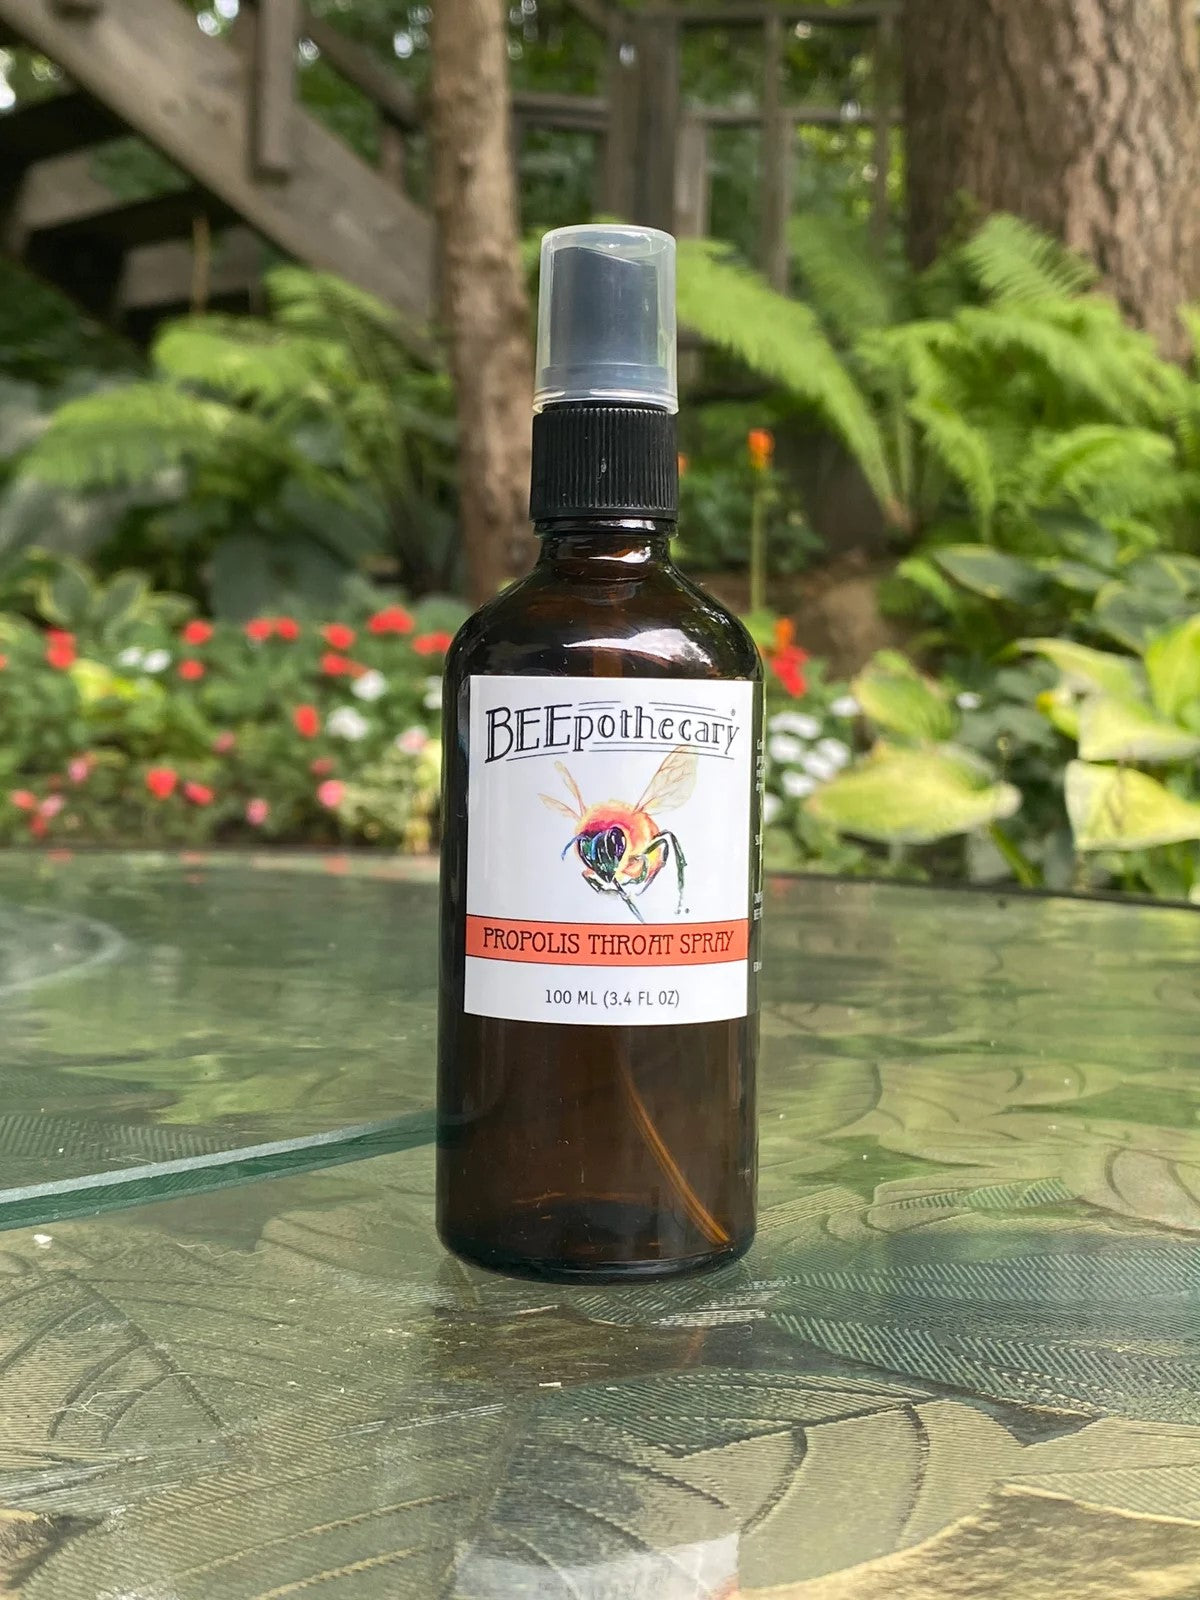 BEEpothecary Propolis Throat Spray in 100 ml brown spray bottle with white label.